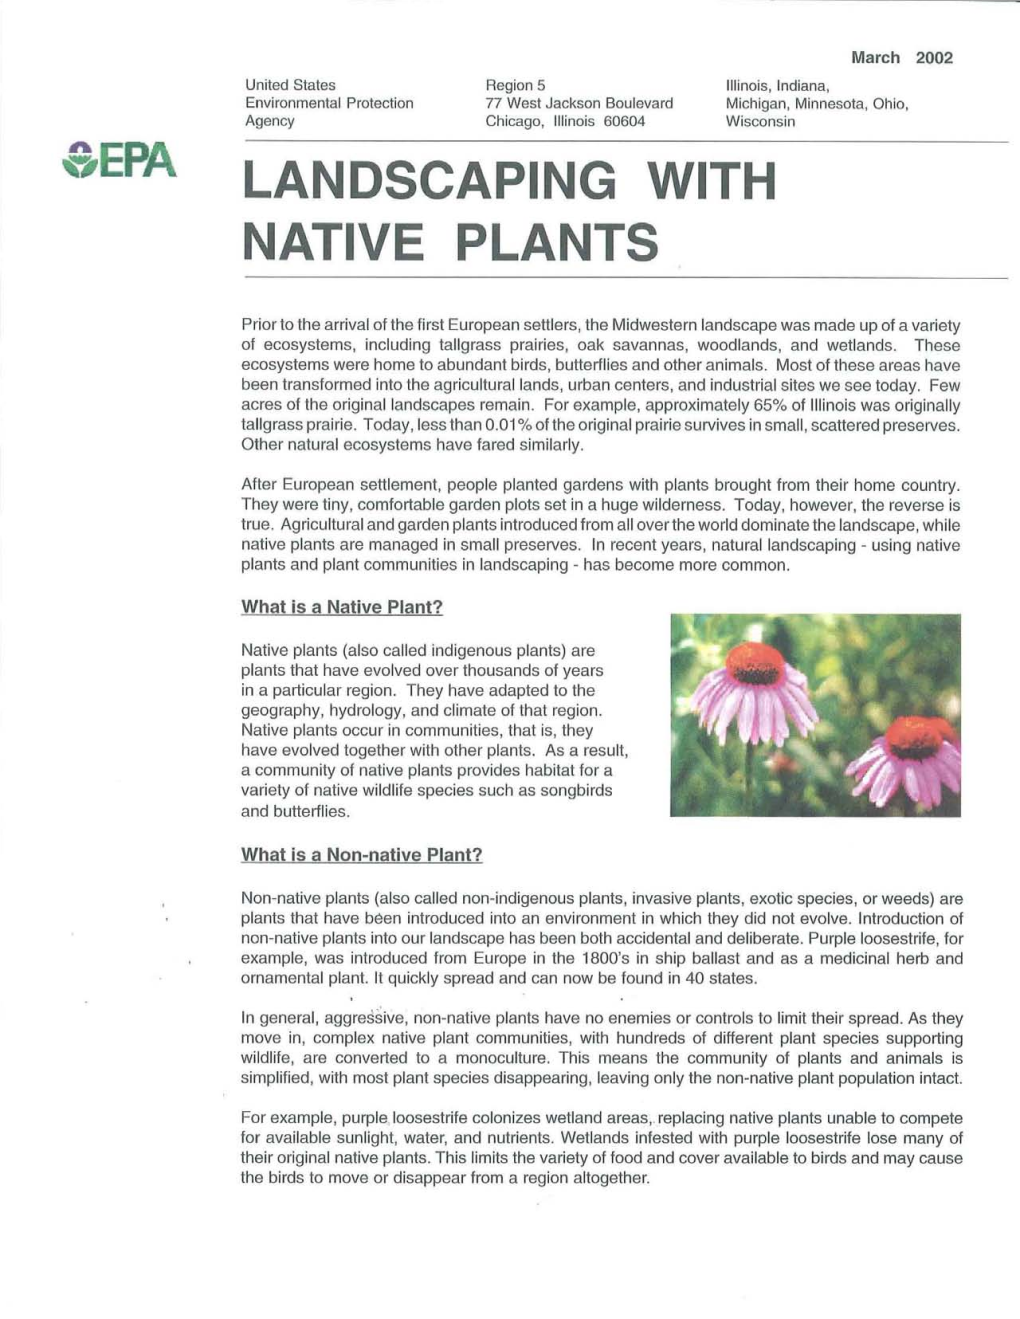 EPA Landscaping with Native Plants